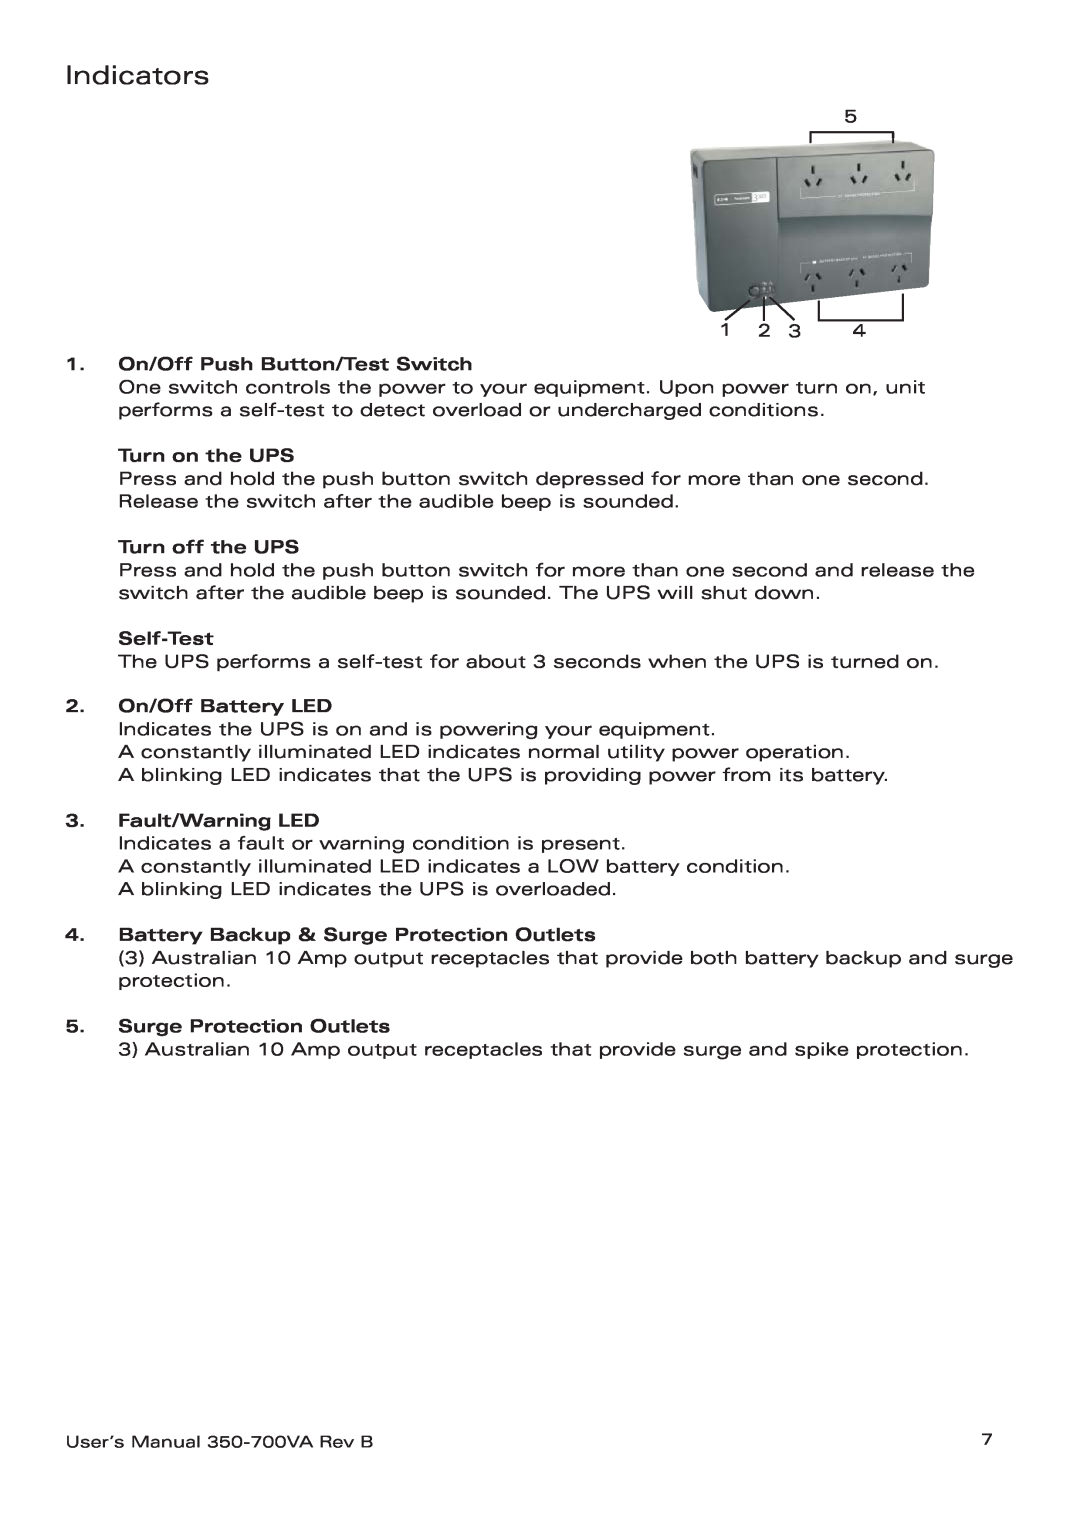 Eaton Electrical 3105 UPS Indicators, 1. On/Off Push Button/Test Switch, Turn on the UPS, Turn off the UPS, Self-Test 